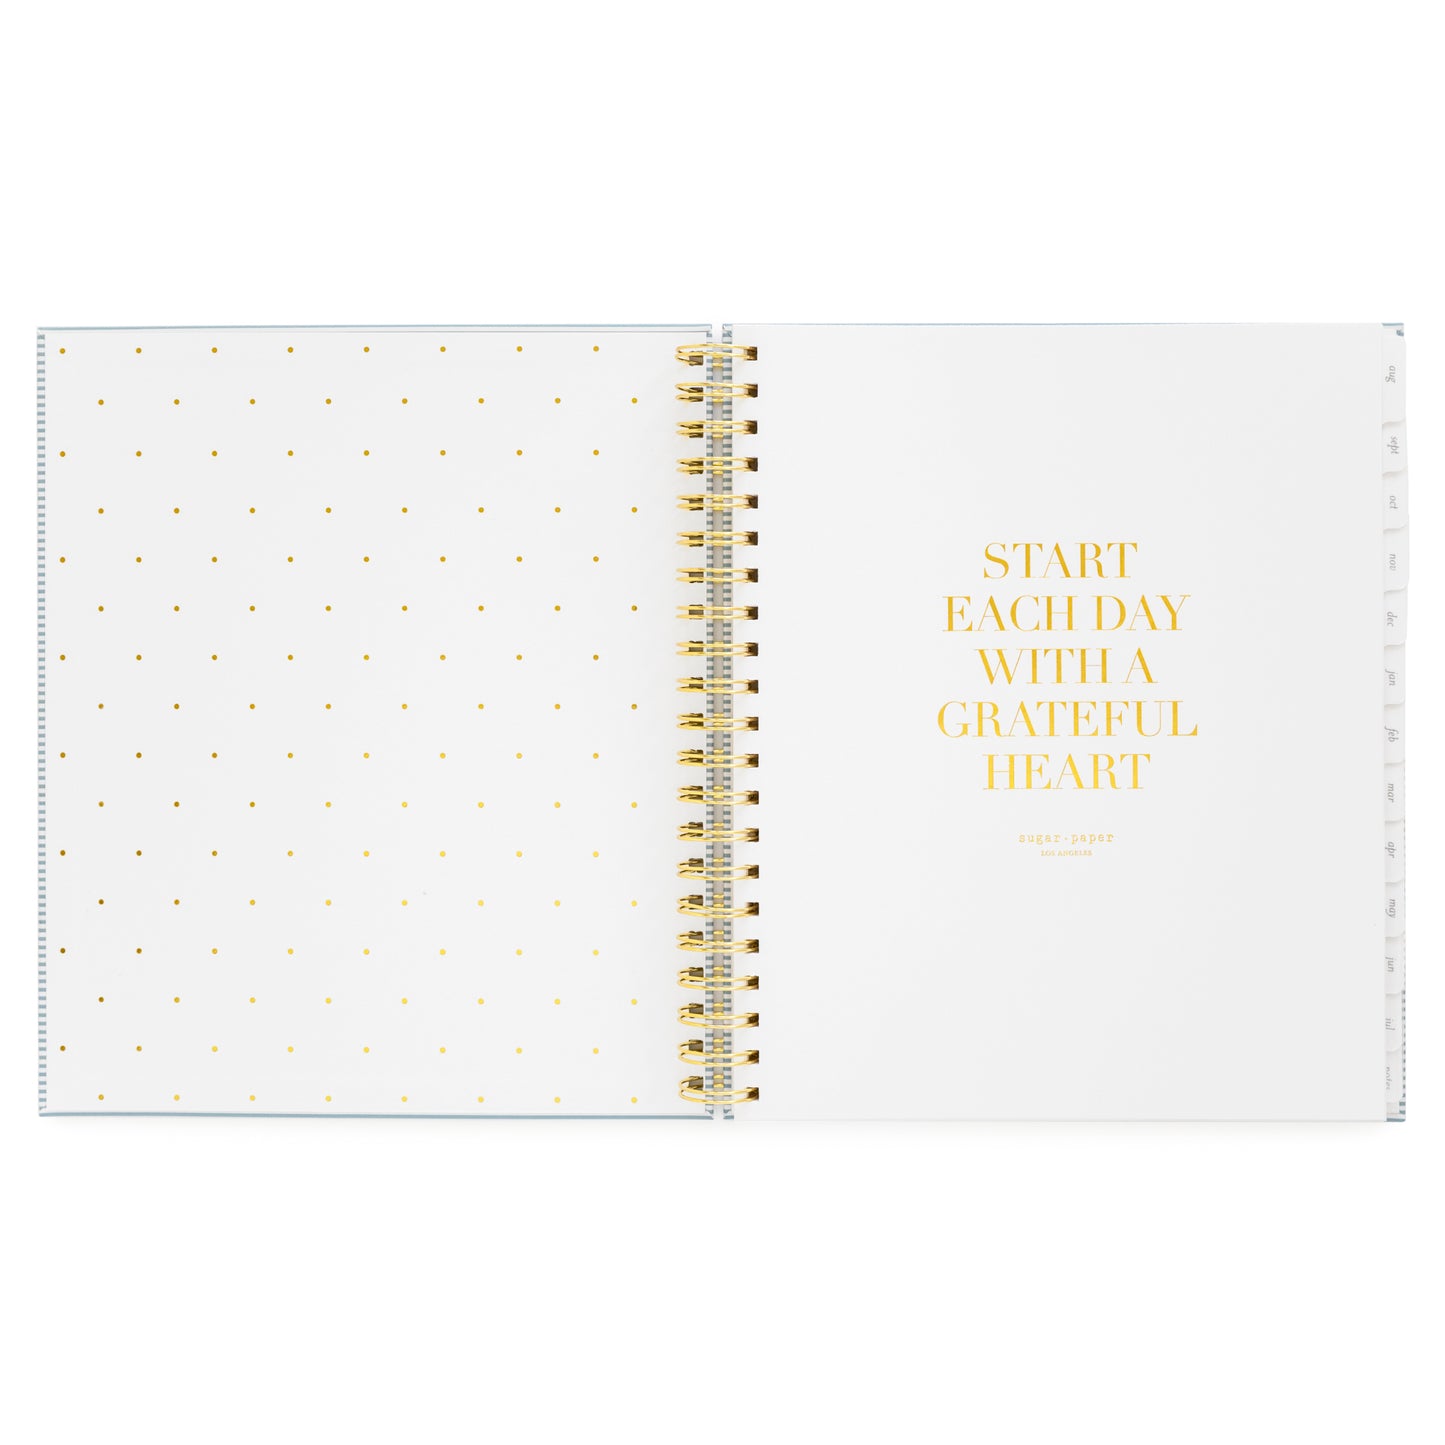 Interior of large spiral academic planner - start each day with a grateful heart